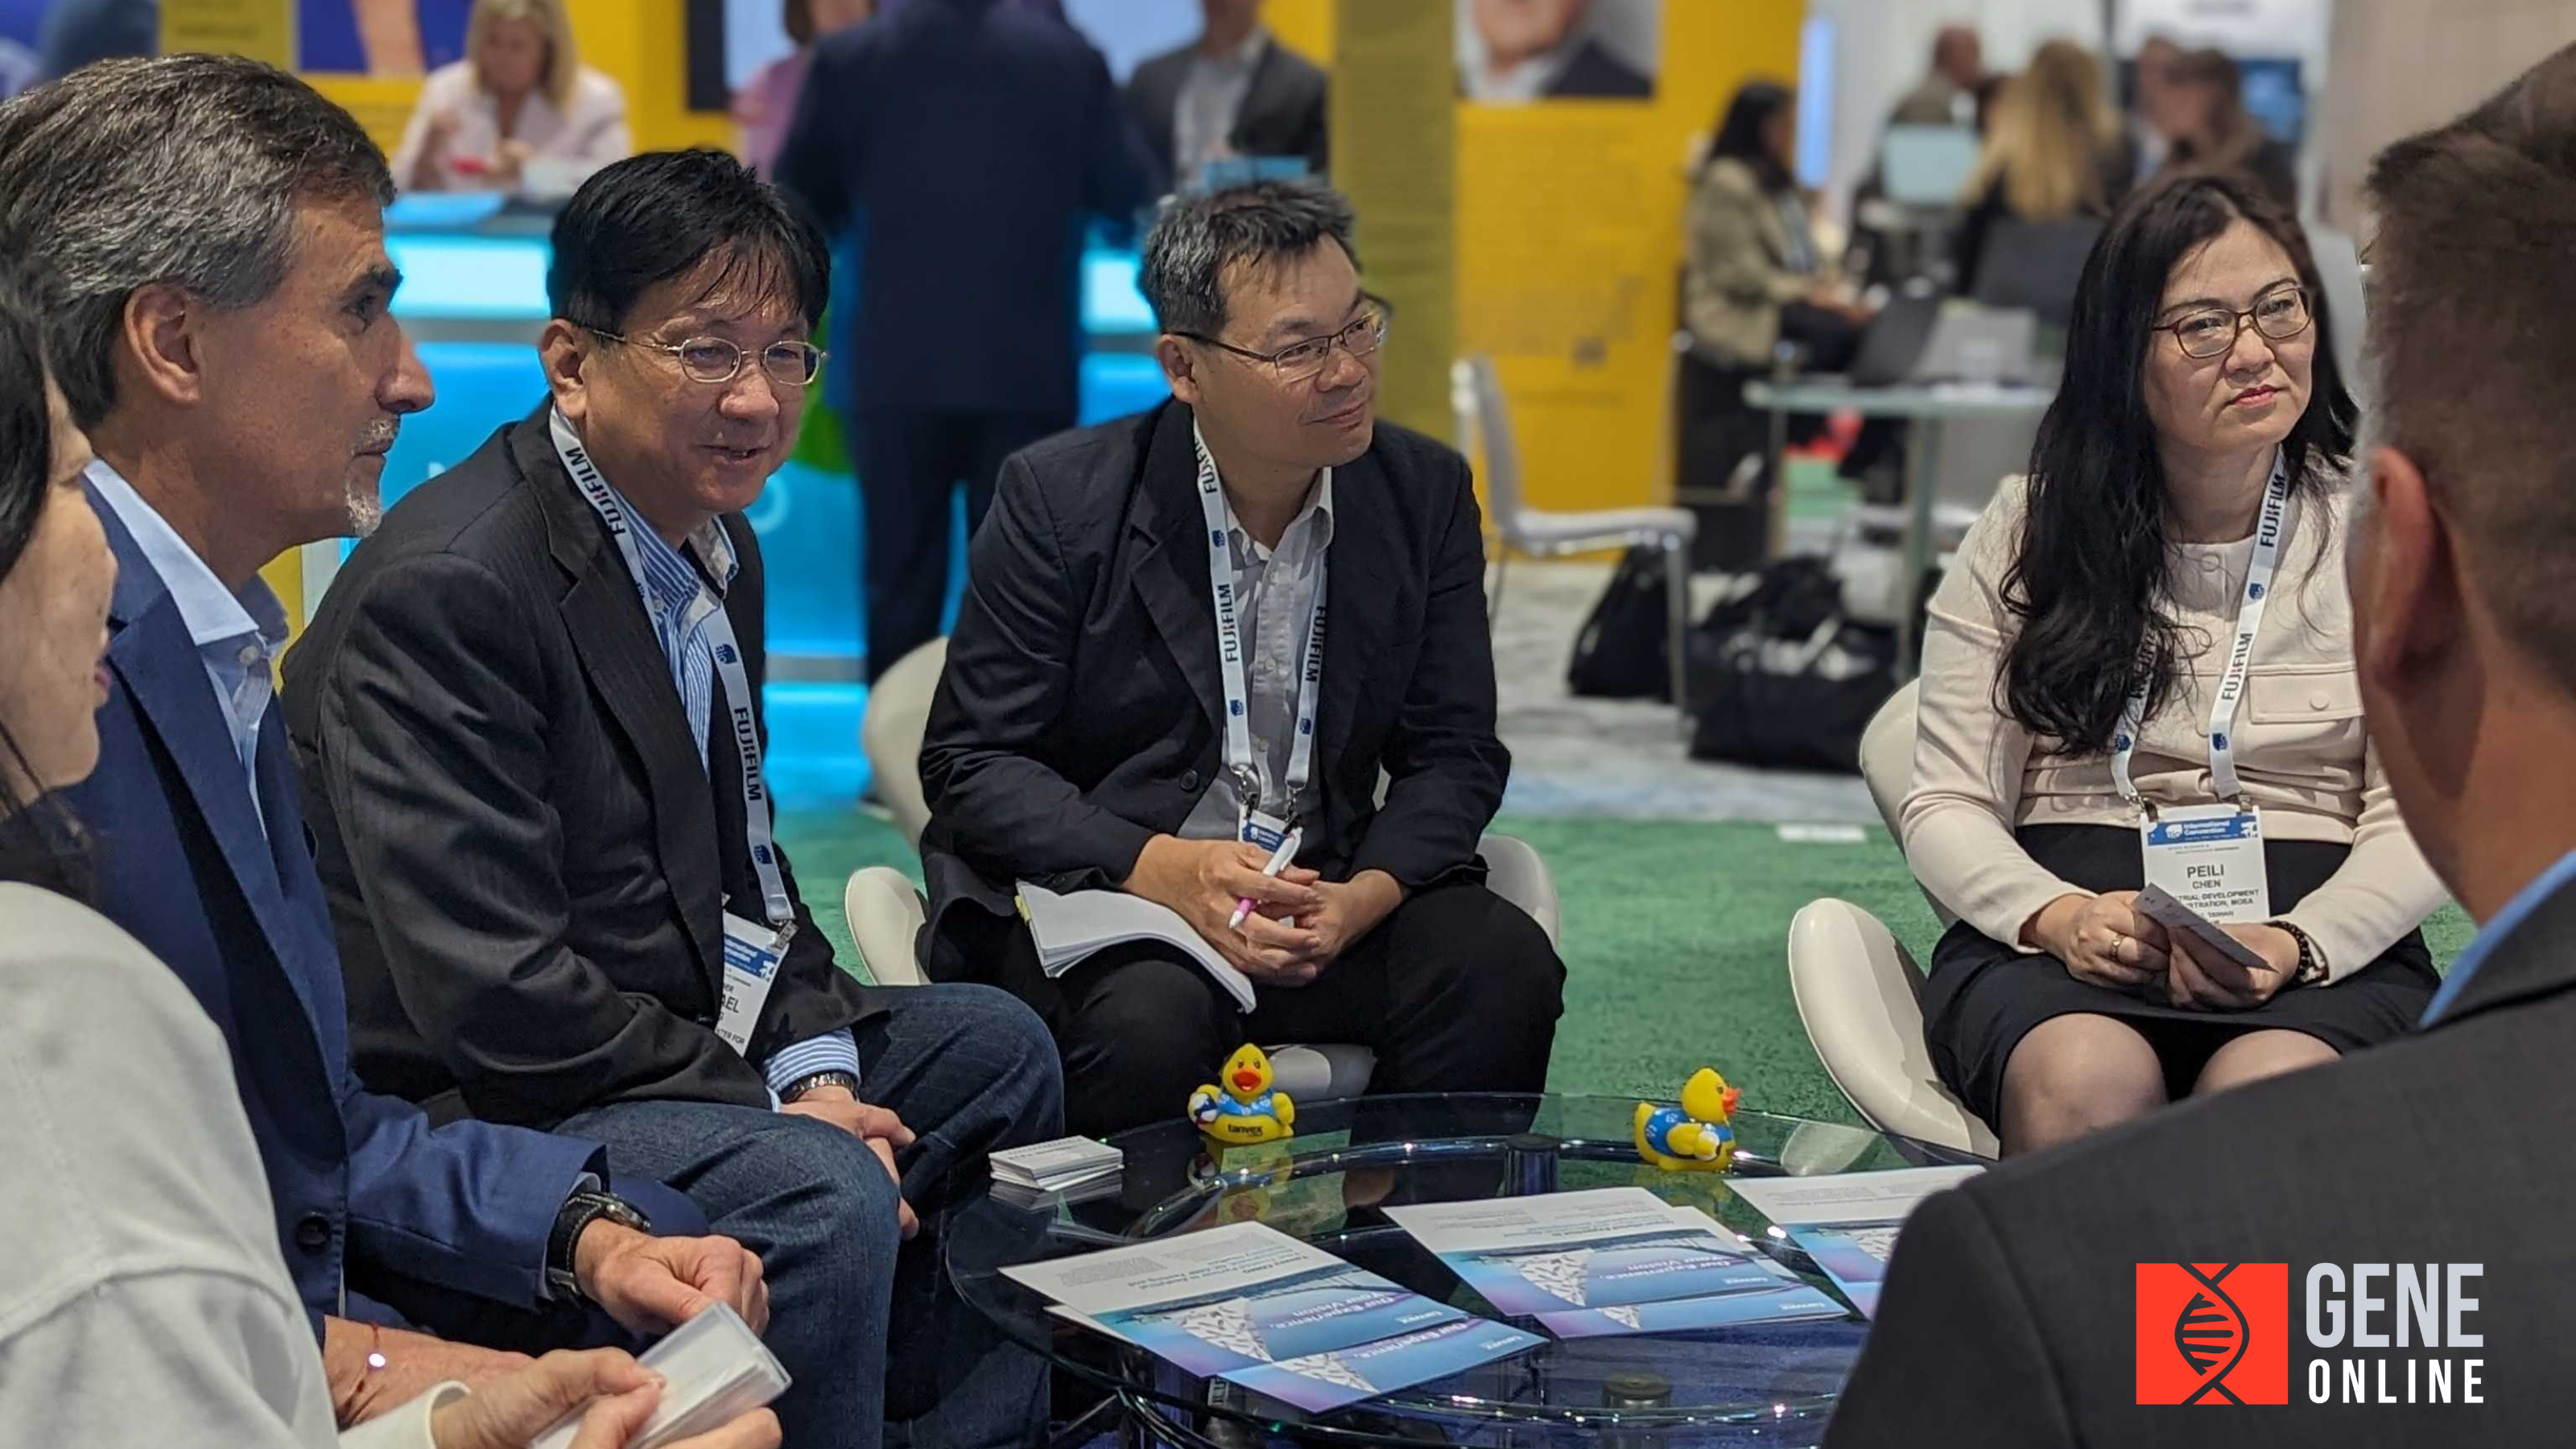 Taiwan Pavilion at BIO US in San Diego: Six major biomedical research institutions from Taiwan showcased their technological achievements in agricultural biotechnology, pharmaceuticals, and medical devices.